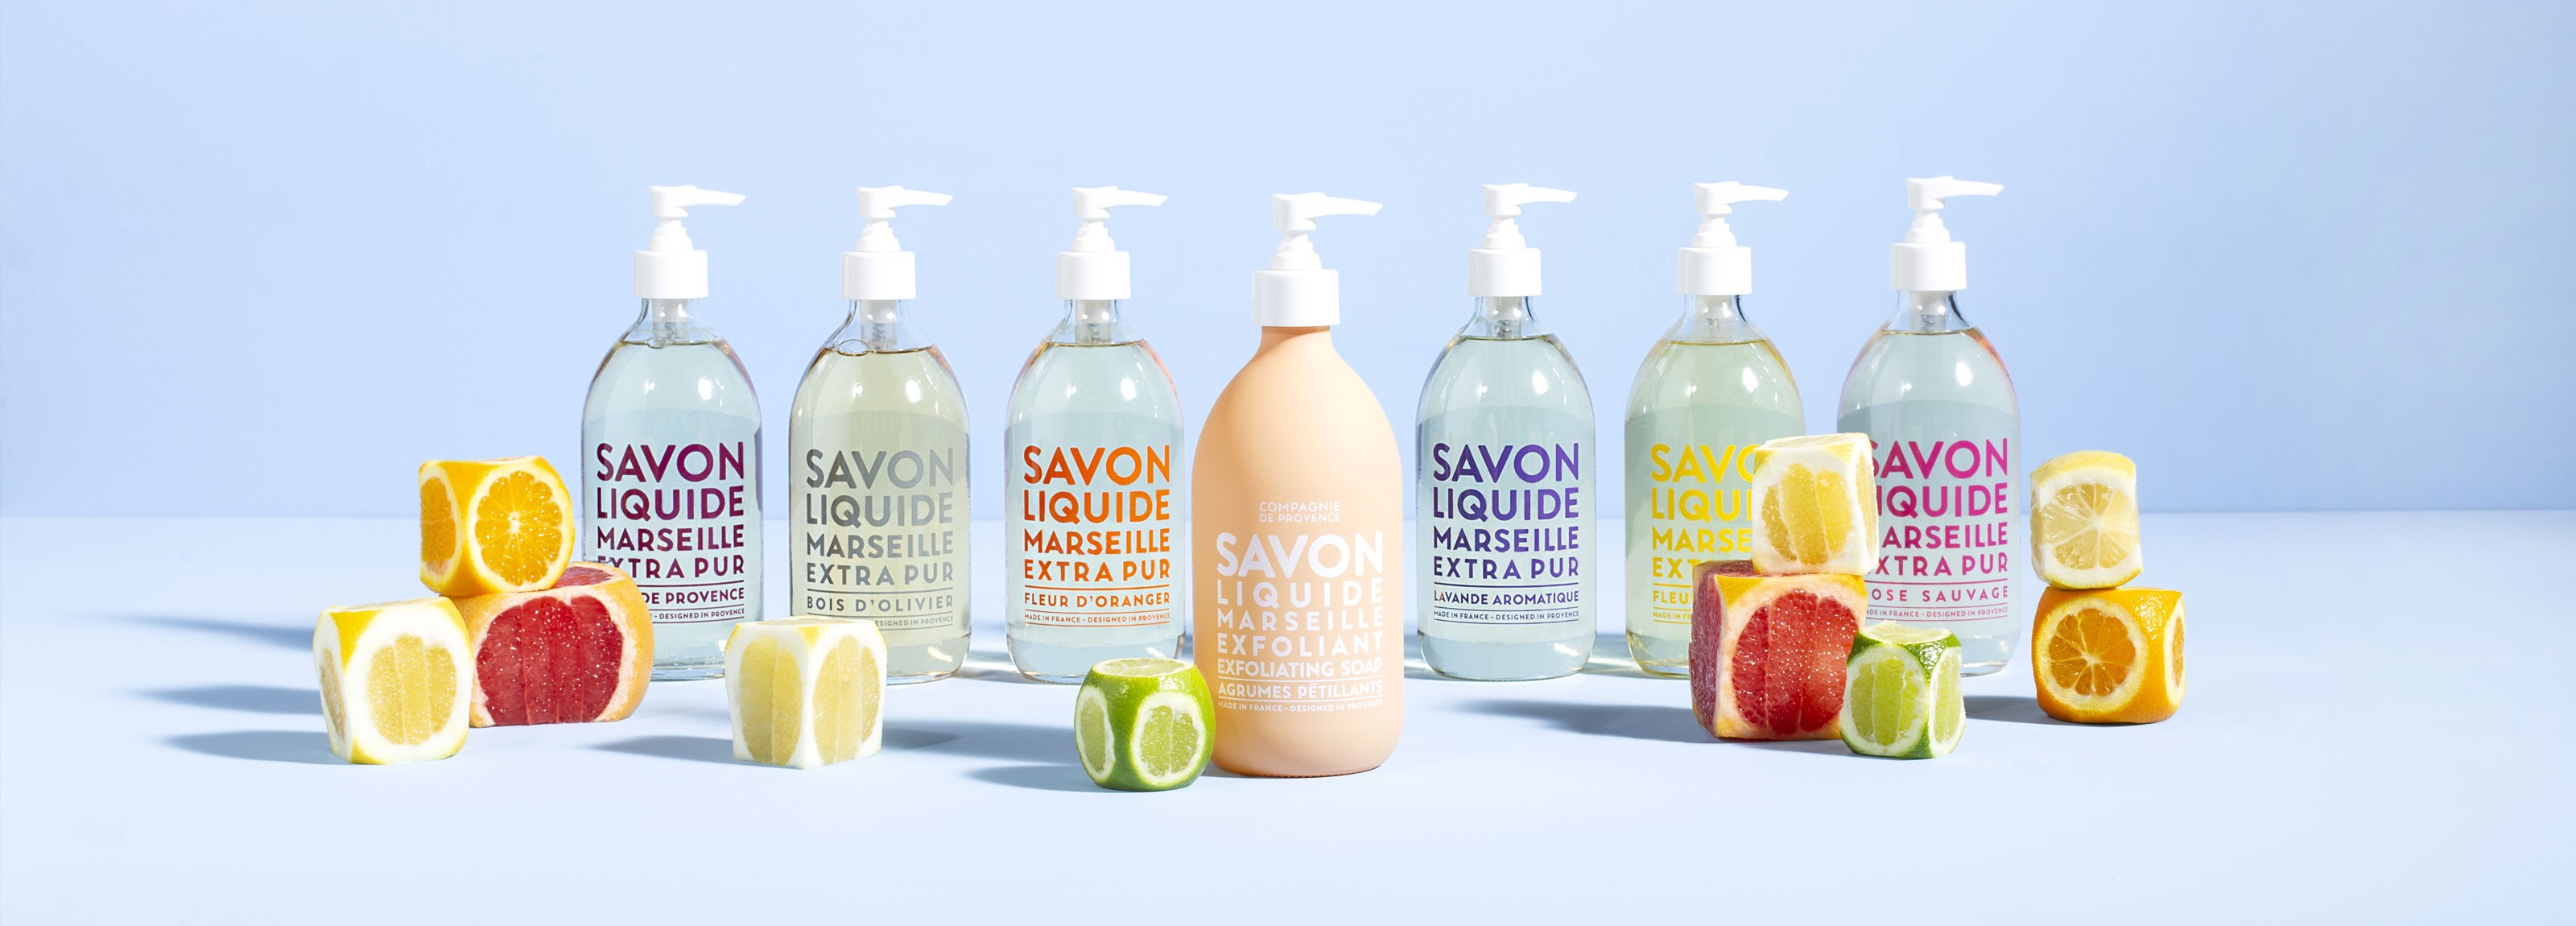 savon liquide bathroom products and fruit